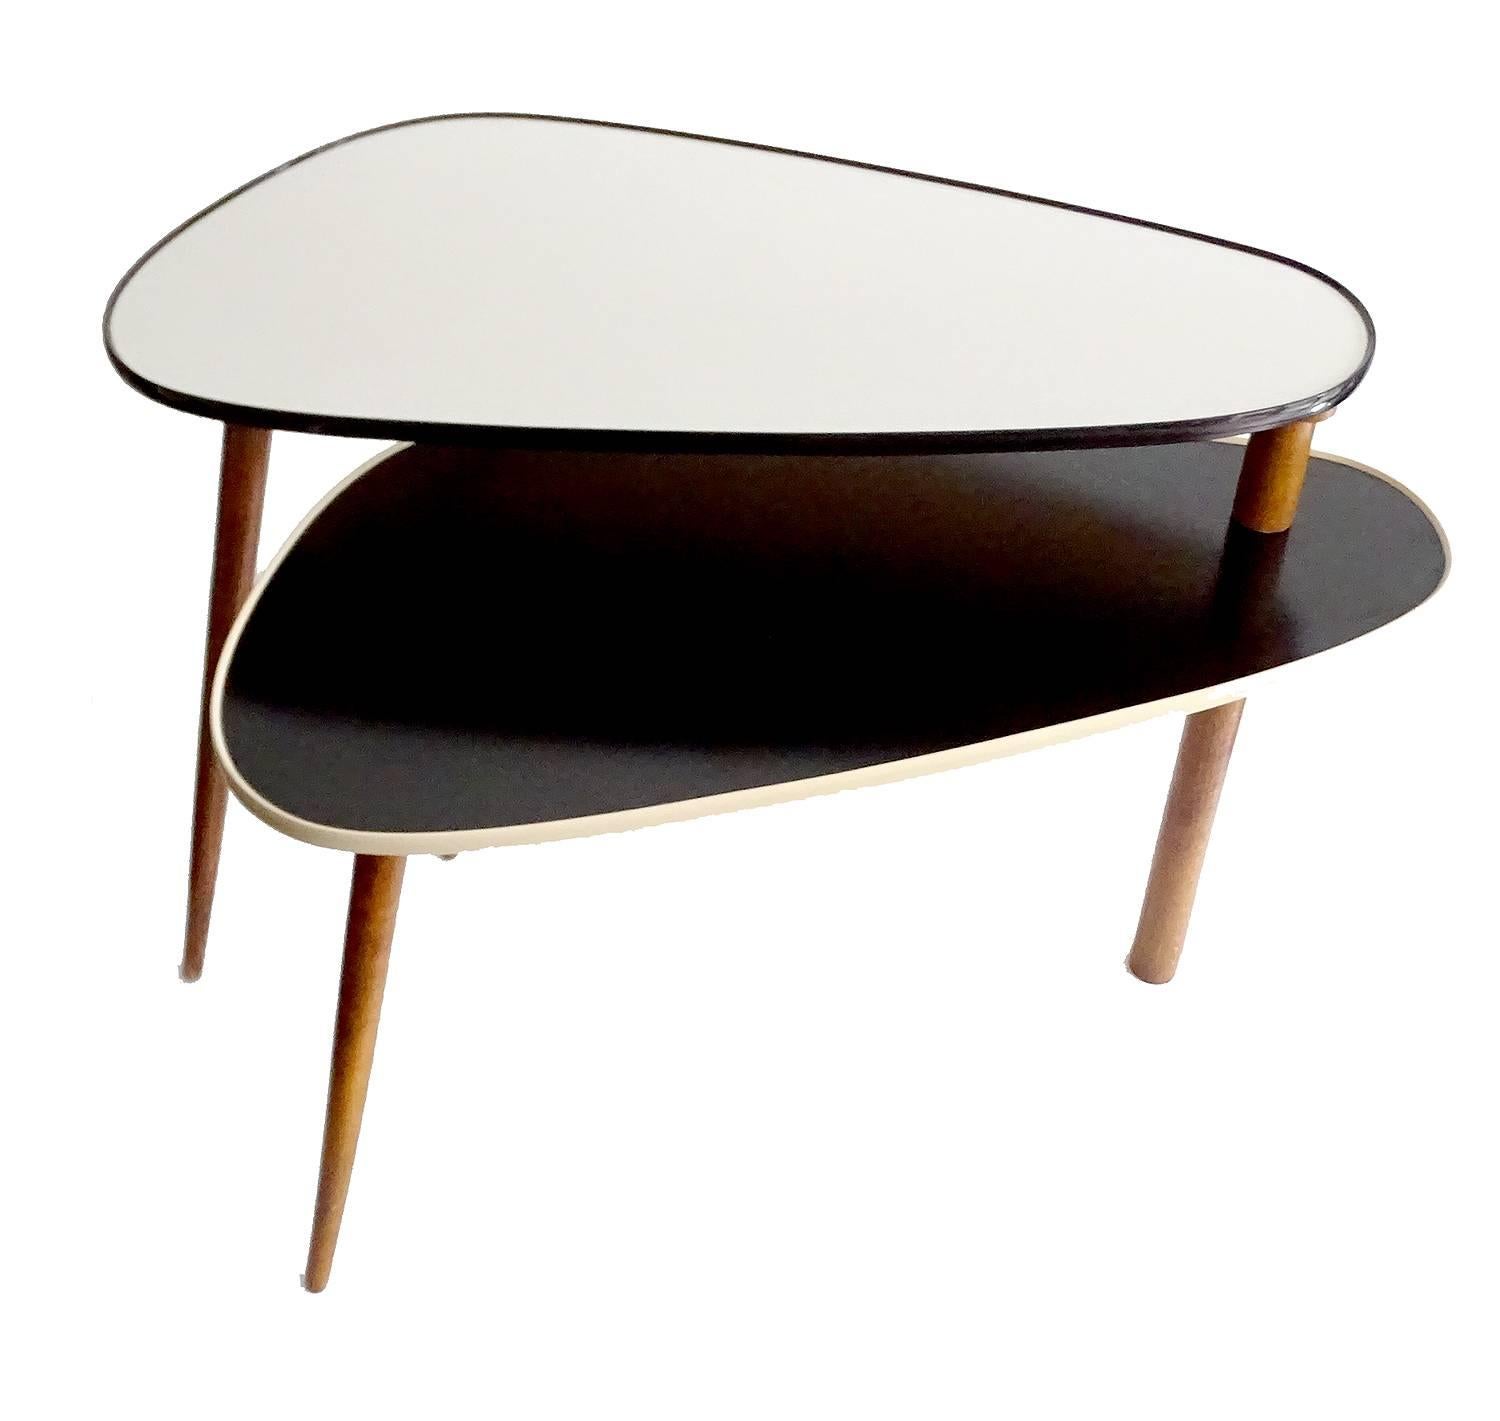 Stunning Mid-Century, 1950s double leveled, modular table which offers a multitude of possible combination,.

An extremely rare design featuring two oval shaped levels with black and white synthetic laminate, connected at the back on a single pole